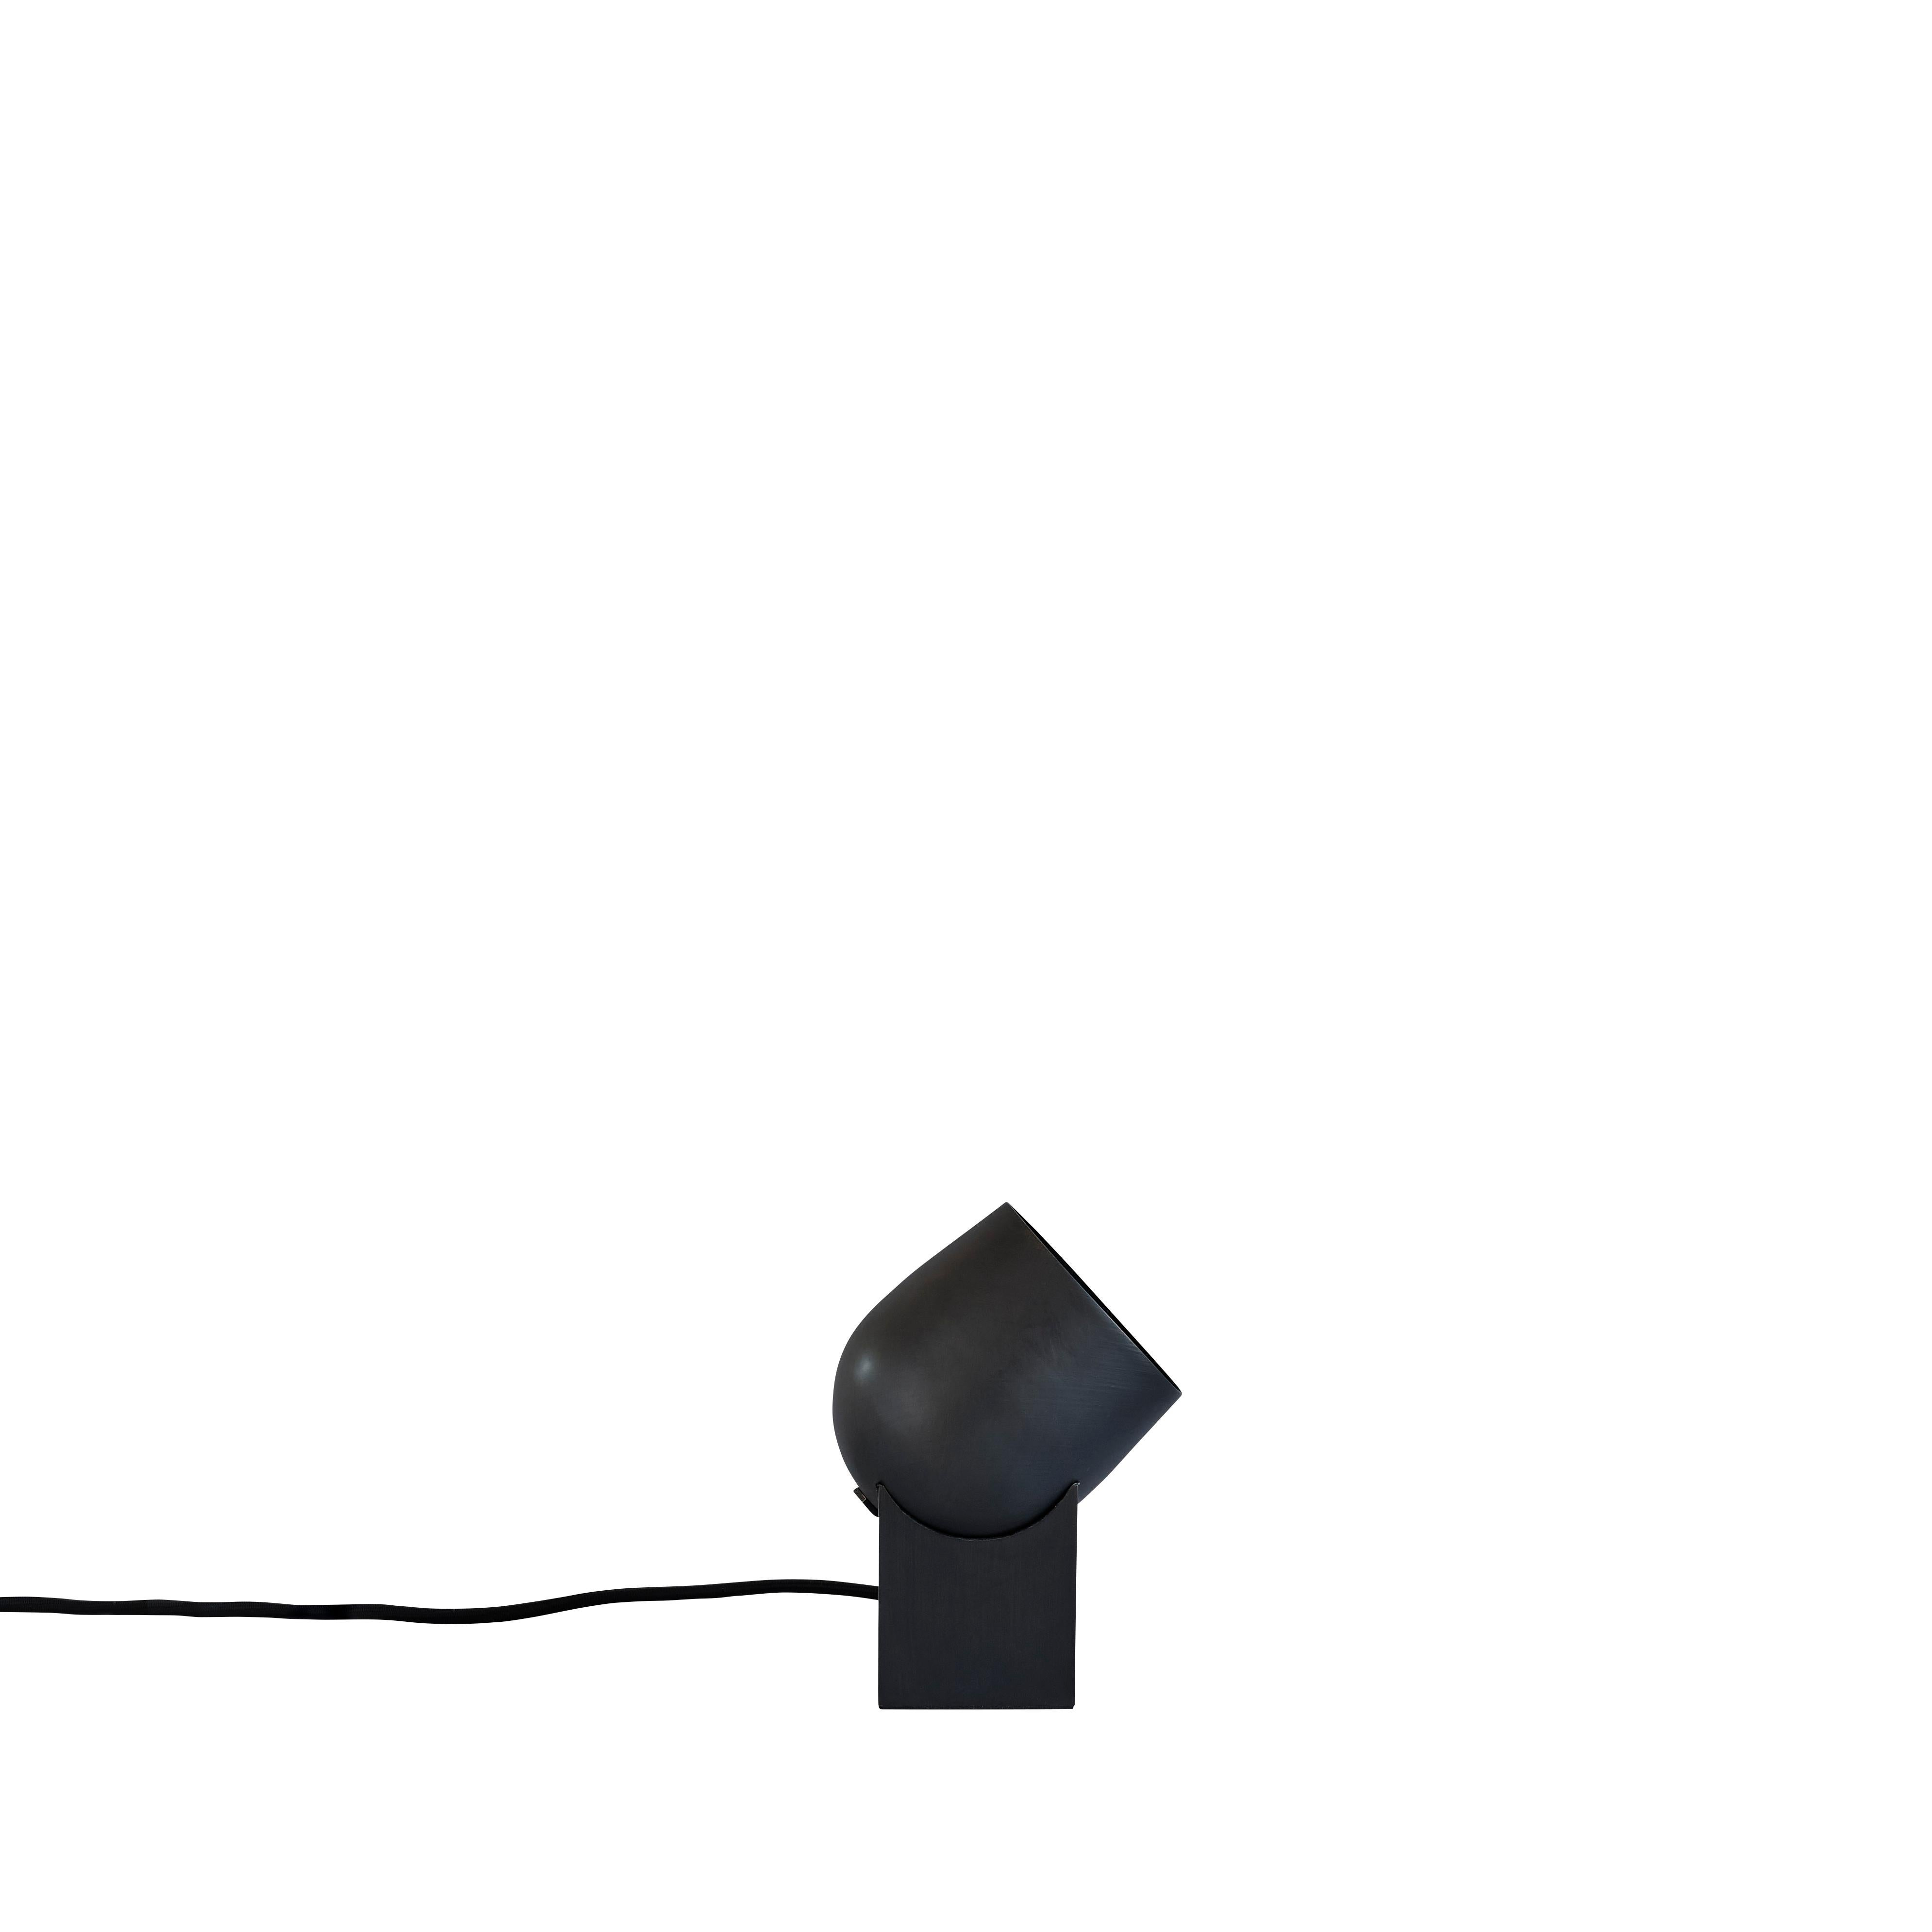 Pivot table lamp by 101 Copenhagen
Designed by Kristian Sofus Hansen & Tommy Hyldahl.
Dimensions: L 10,5 x W 10,5 x H 19 cm
Cable length: 190 CM

Materials: Metal: Plated metal / Burned black
Cable: Fabric covered cable with dimmer switch /